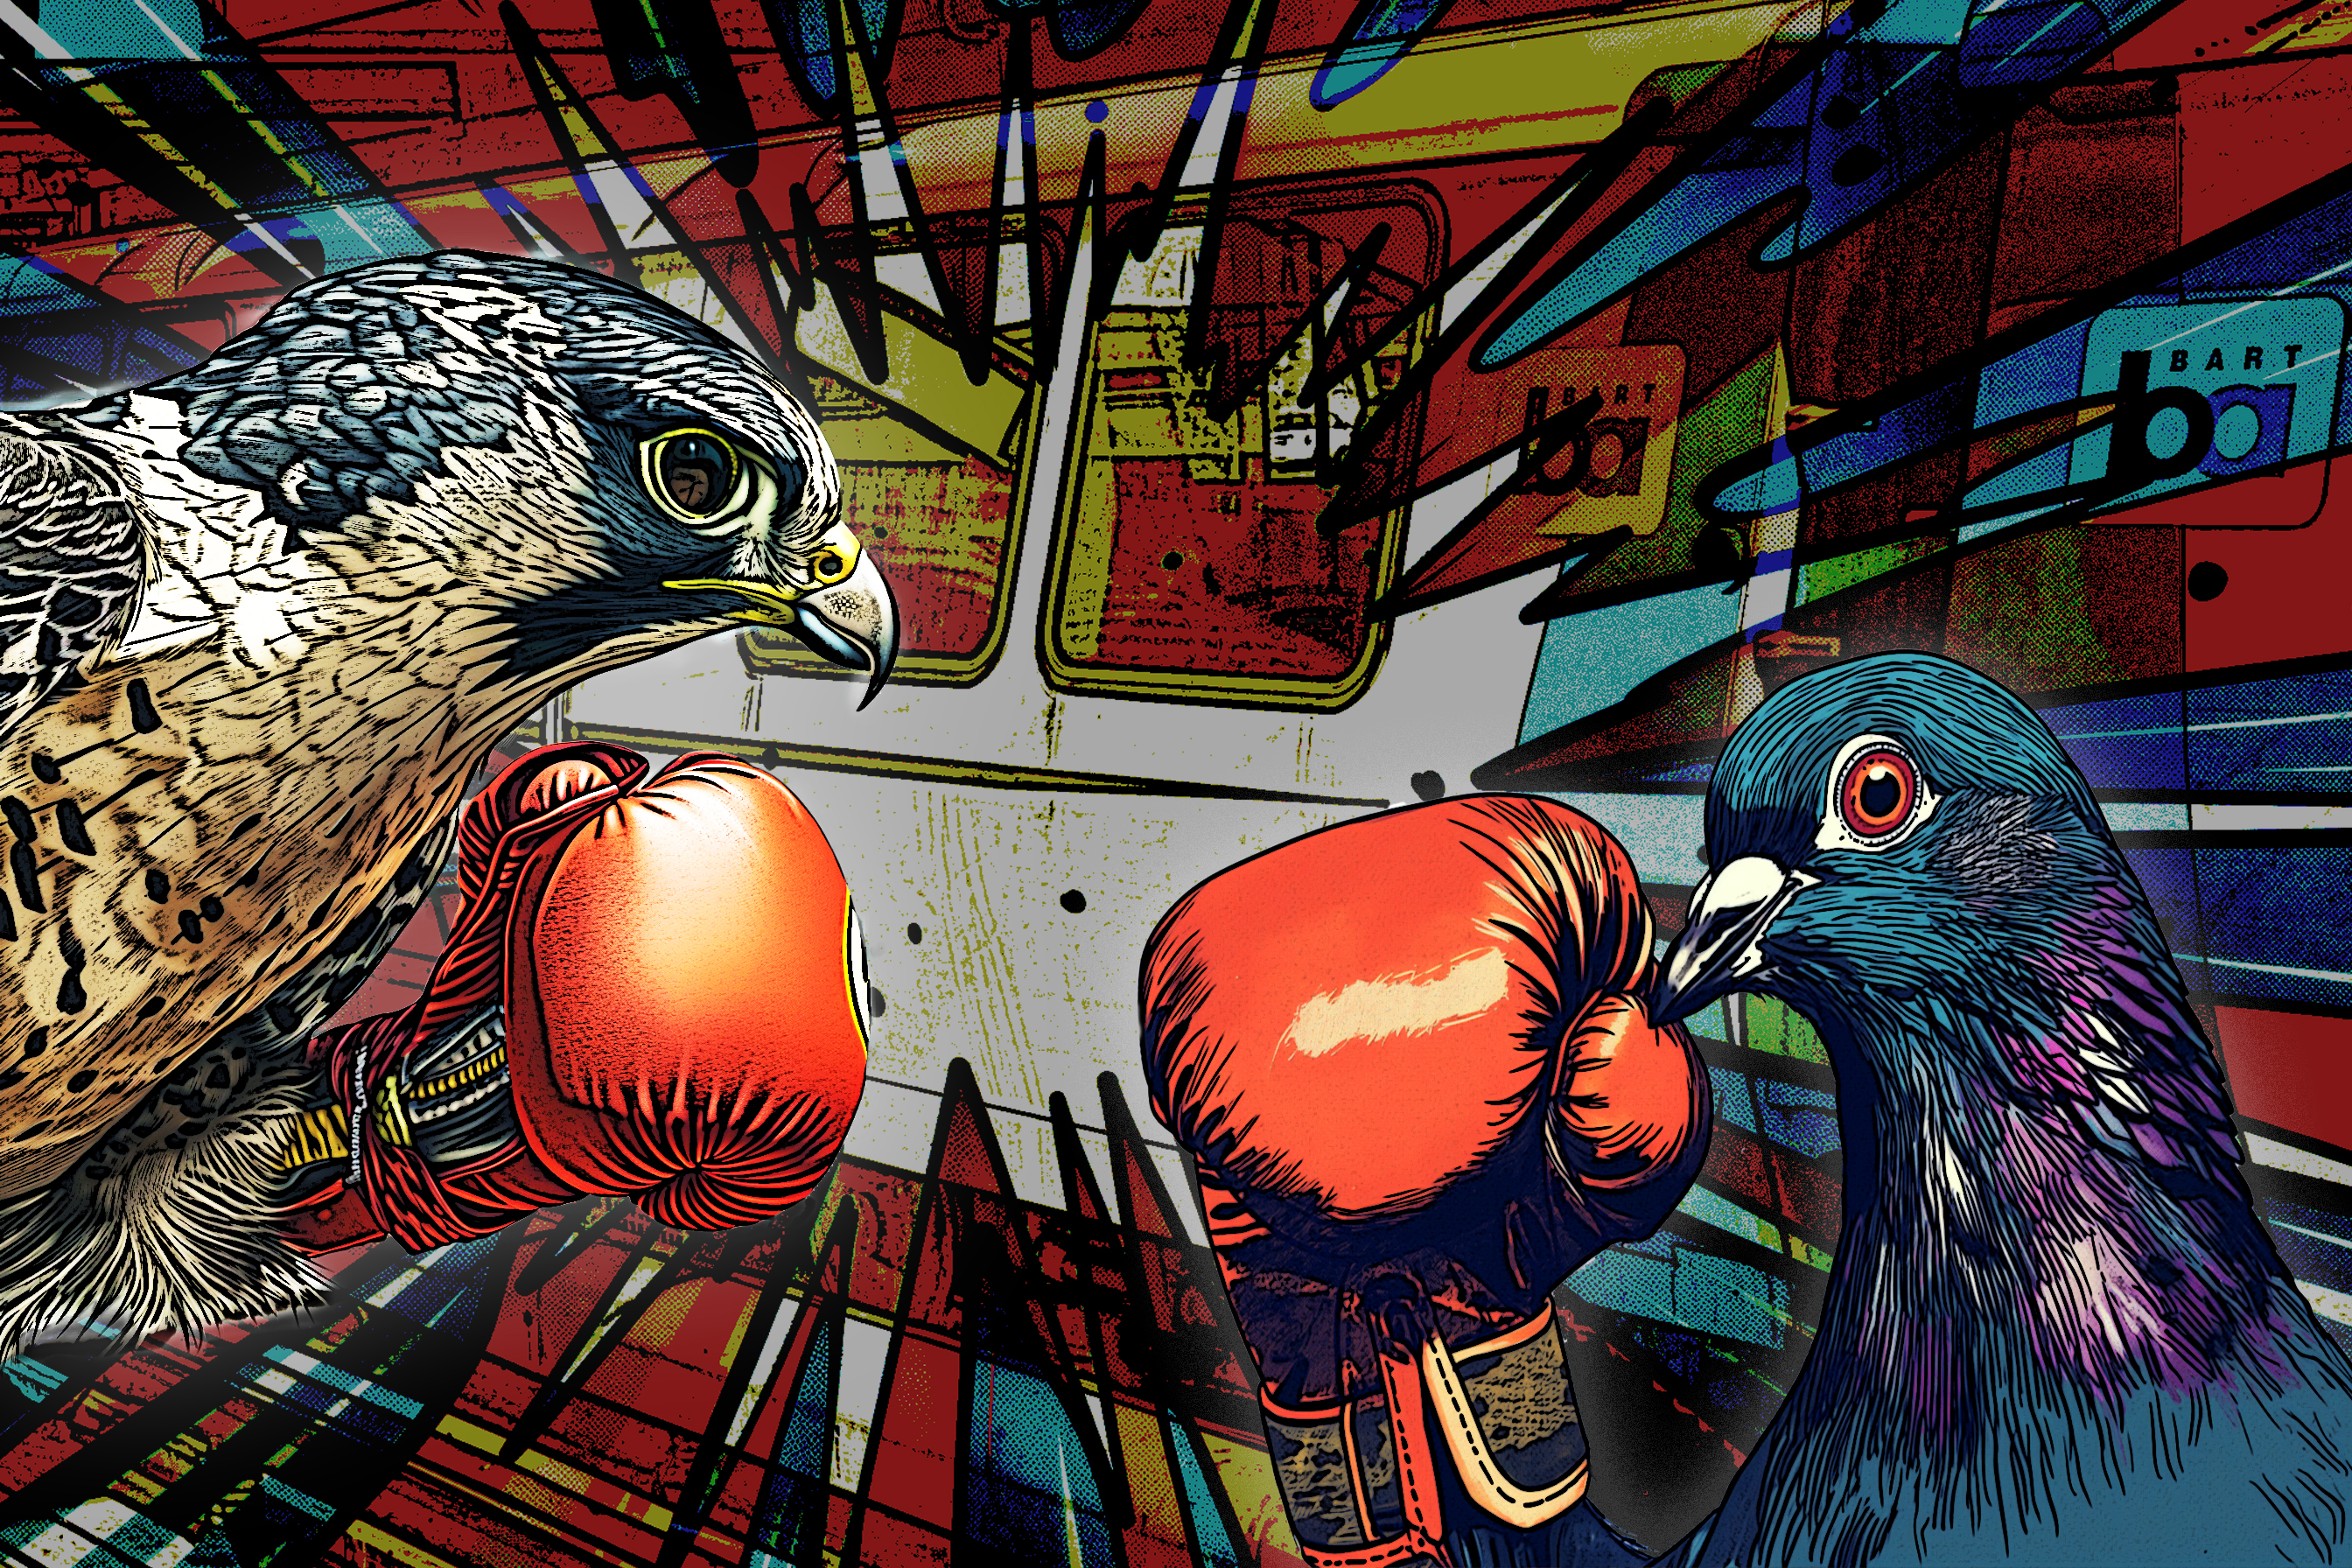 A hawk and a pigeon, both wearing large red boxing gloves, face off in a boxing match amidst a colorful, comic-style background with dynamic motion lines.